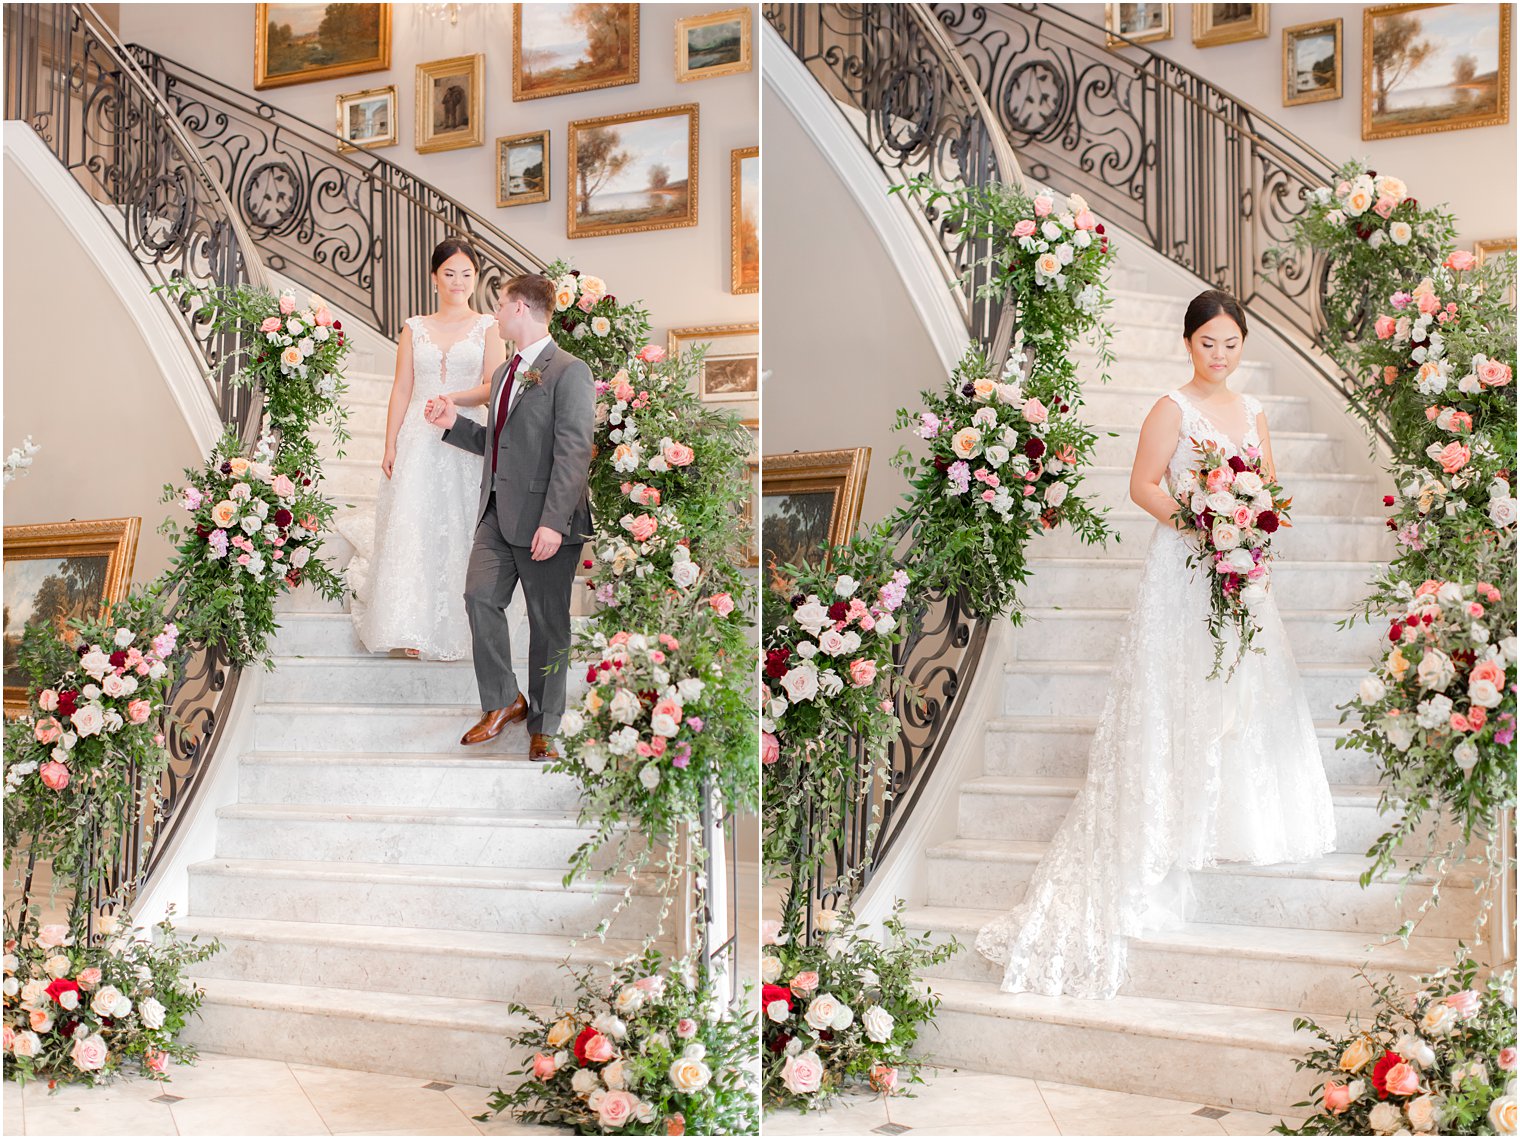 Wedding portraits on staircase at Park Chateau Estate